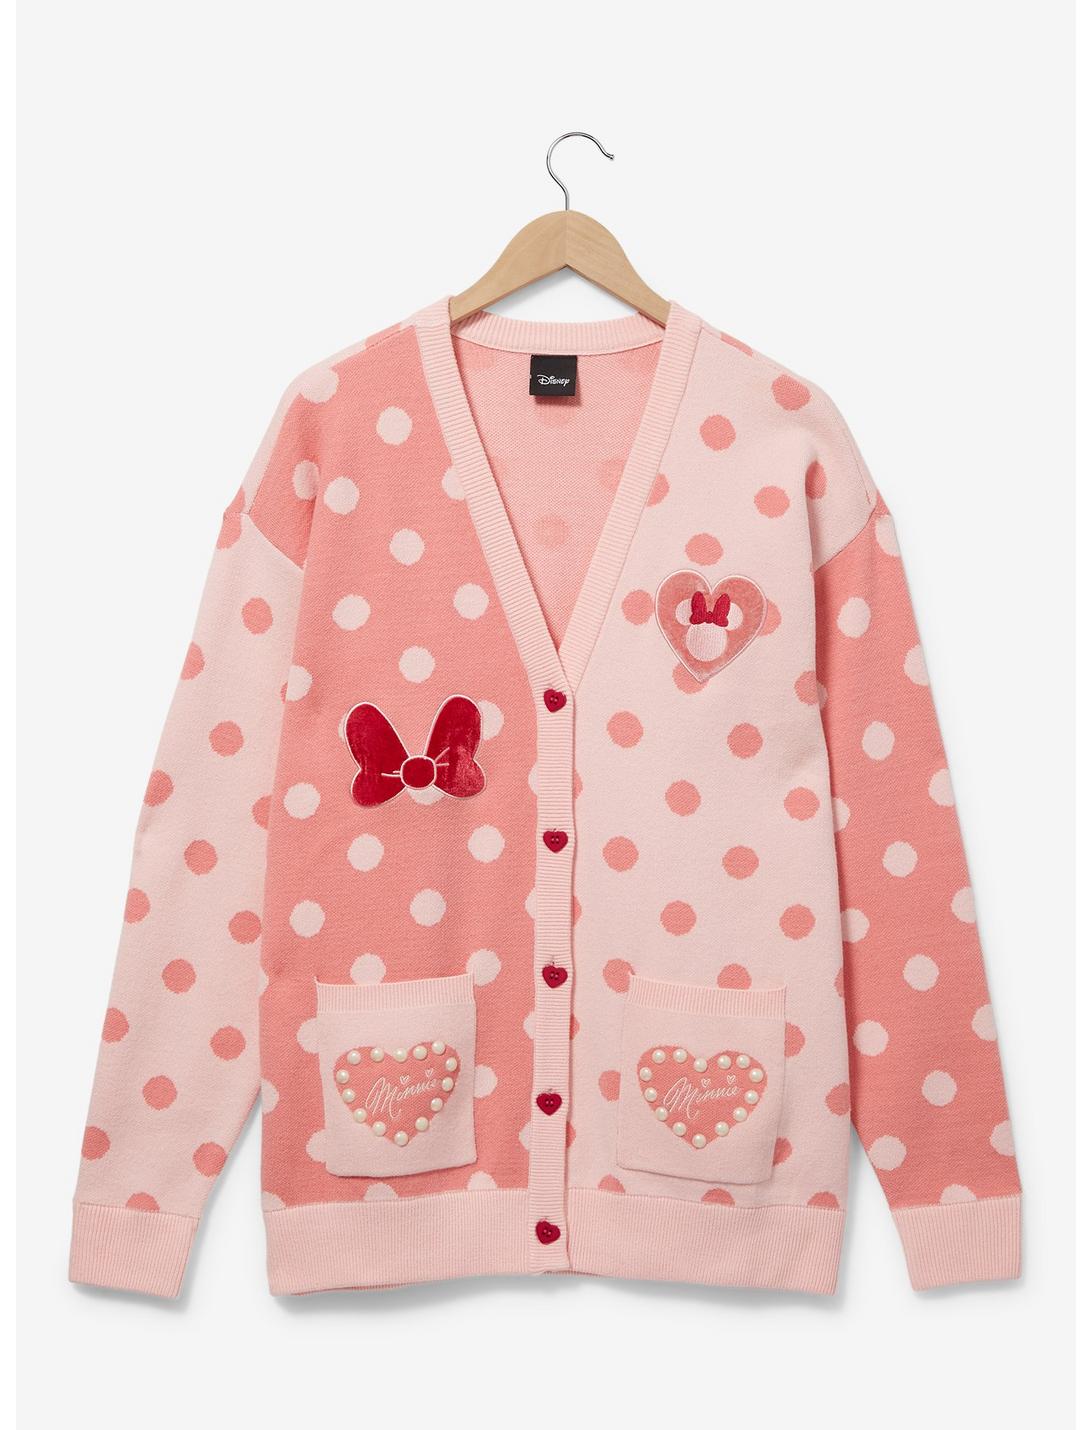 Disney Minnie Mouse Polka Dot Women's Cardigan - BoxLunch Exclusive, PINK, hi-res